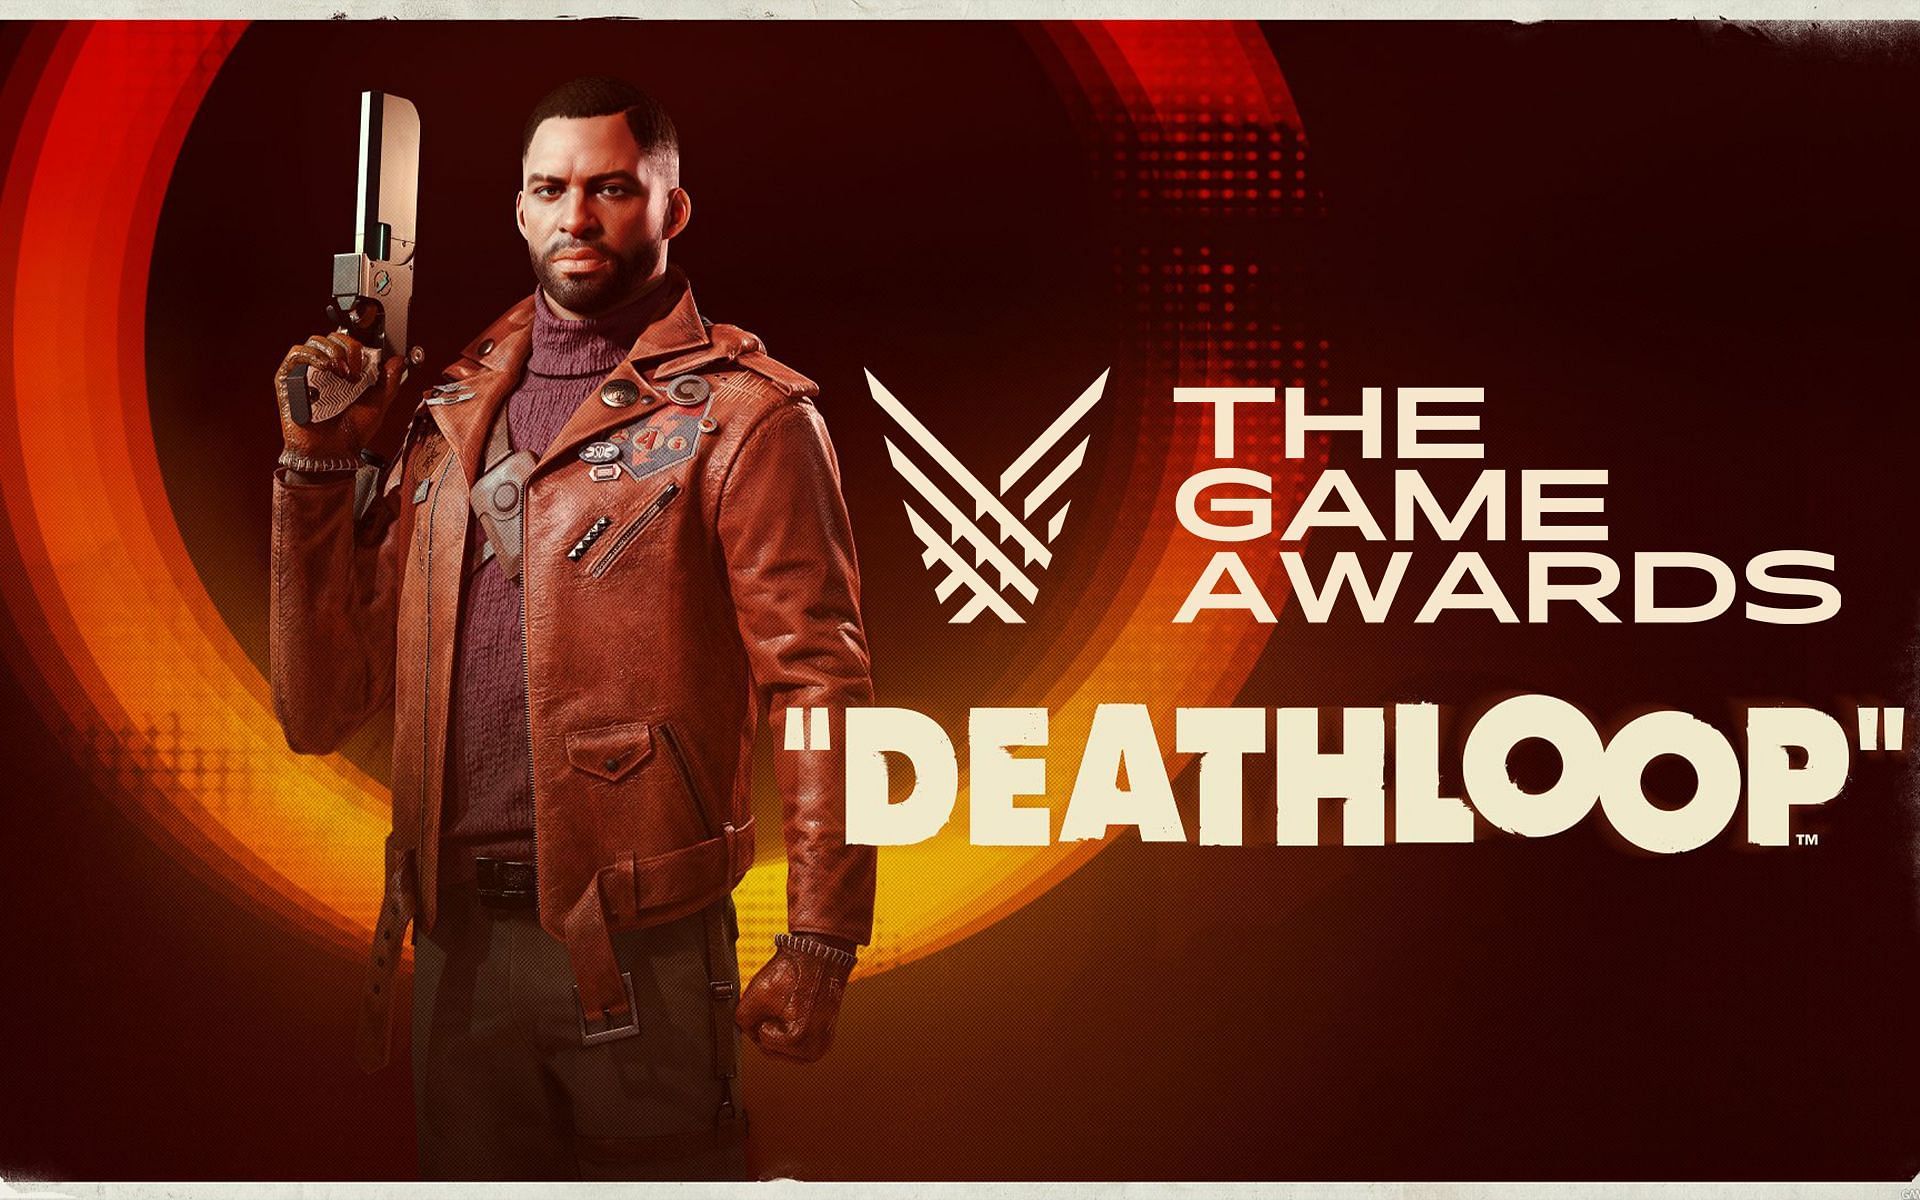 Deathloops bags most nominations at The Game Awards 2021 including Game of the Year